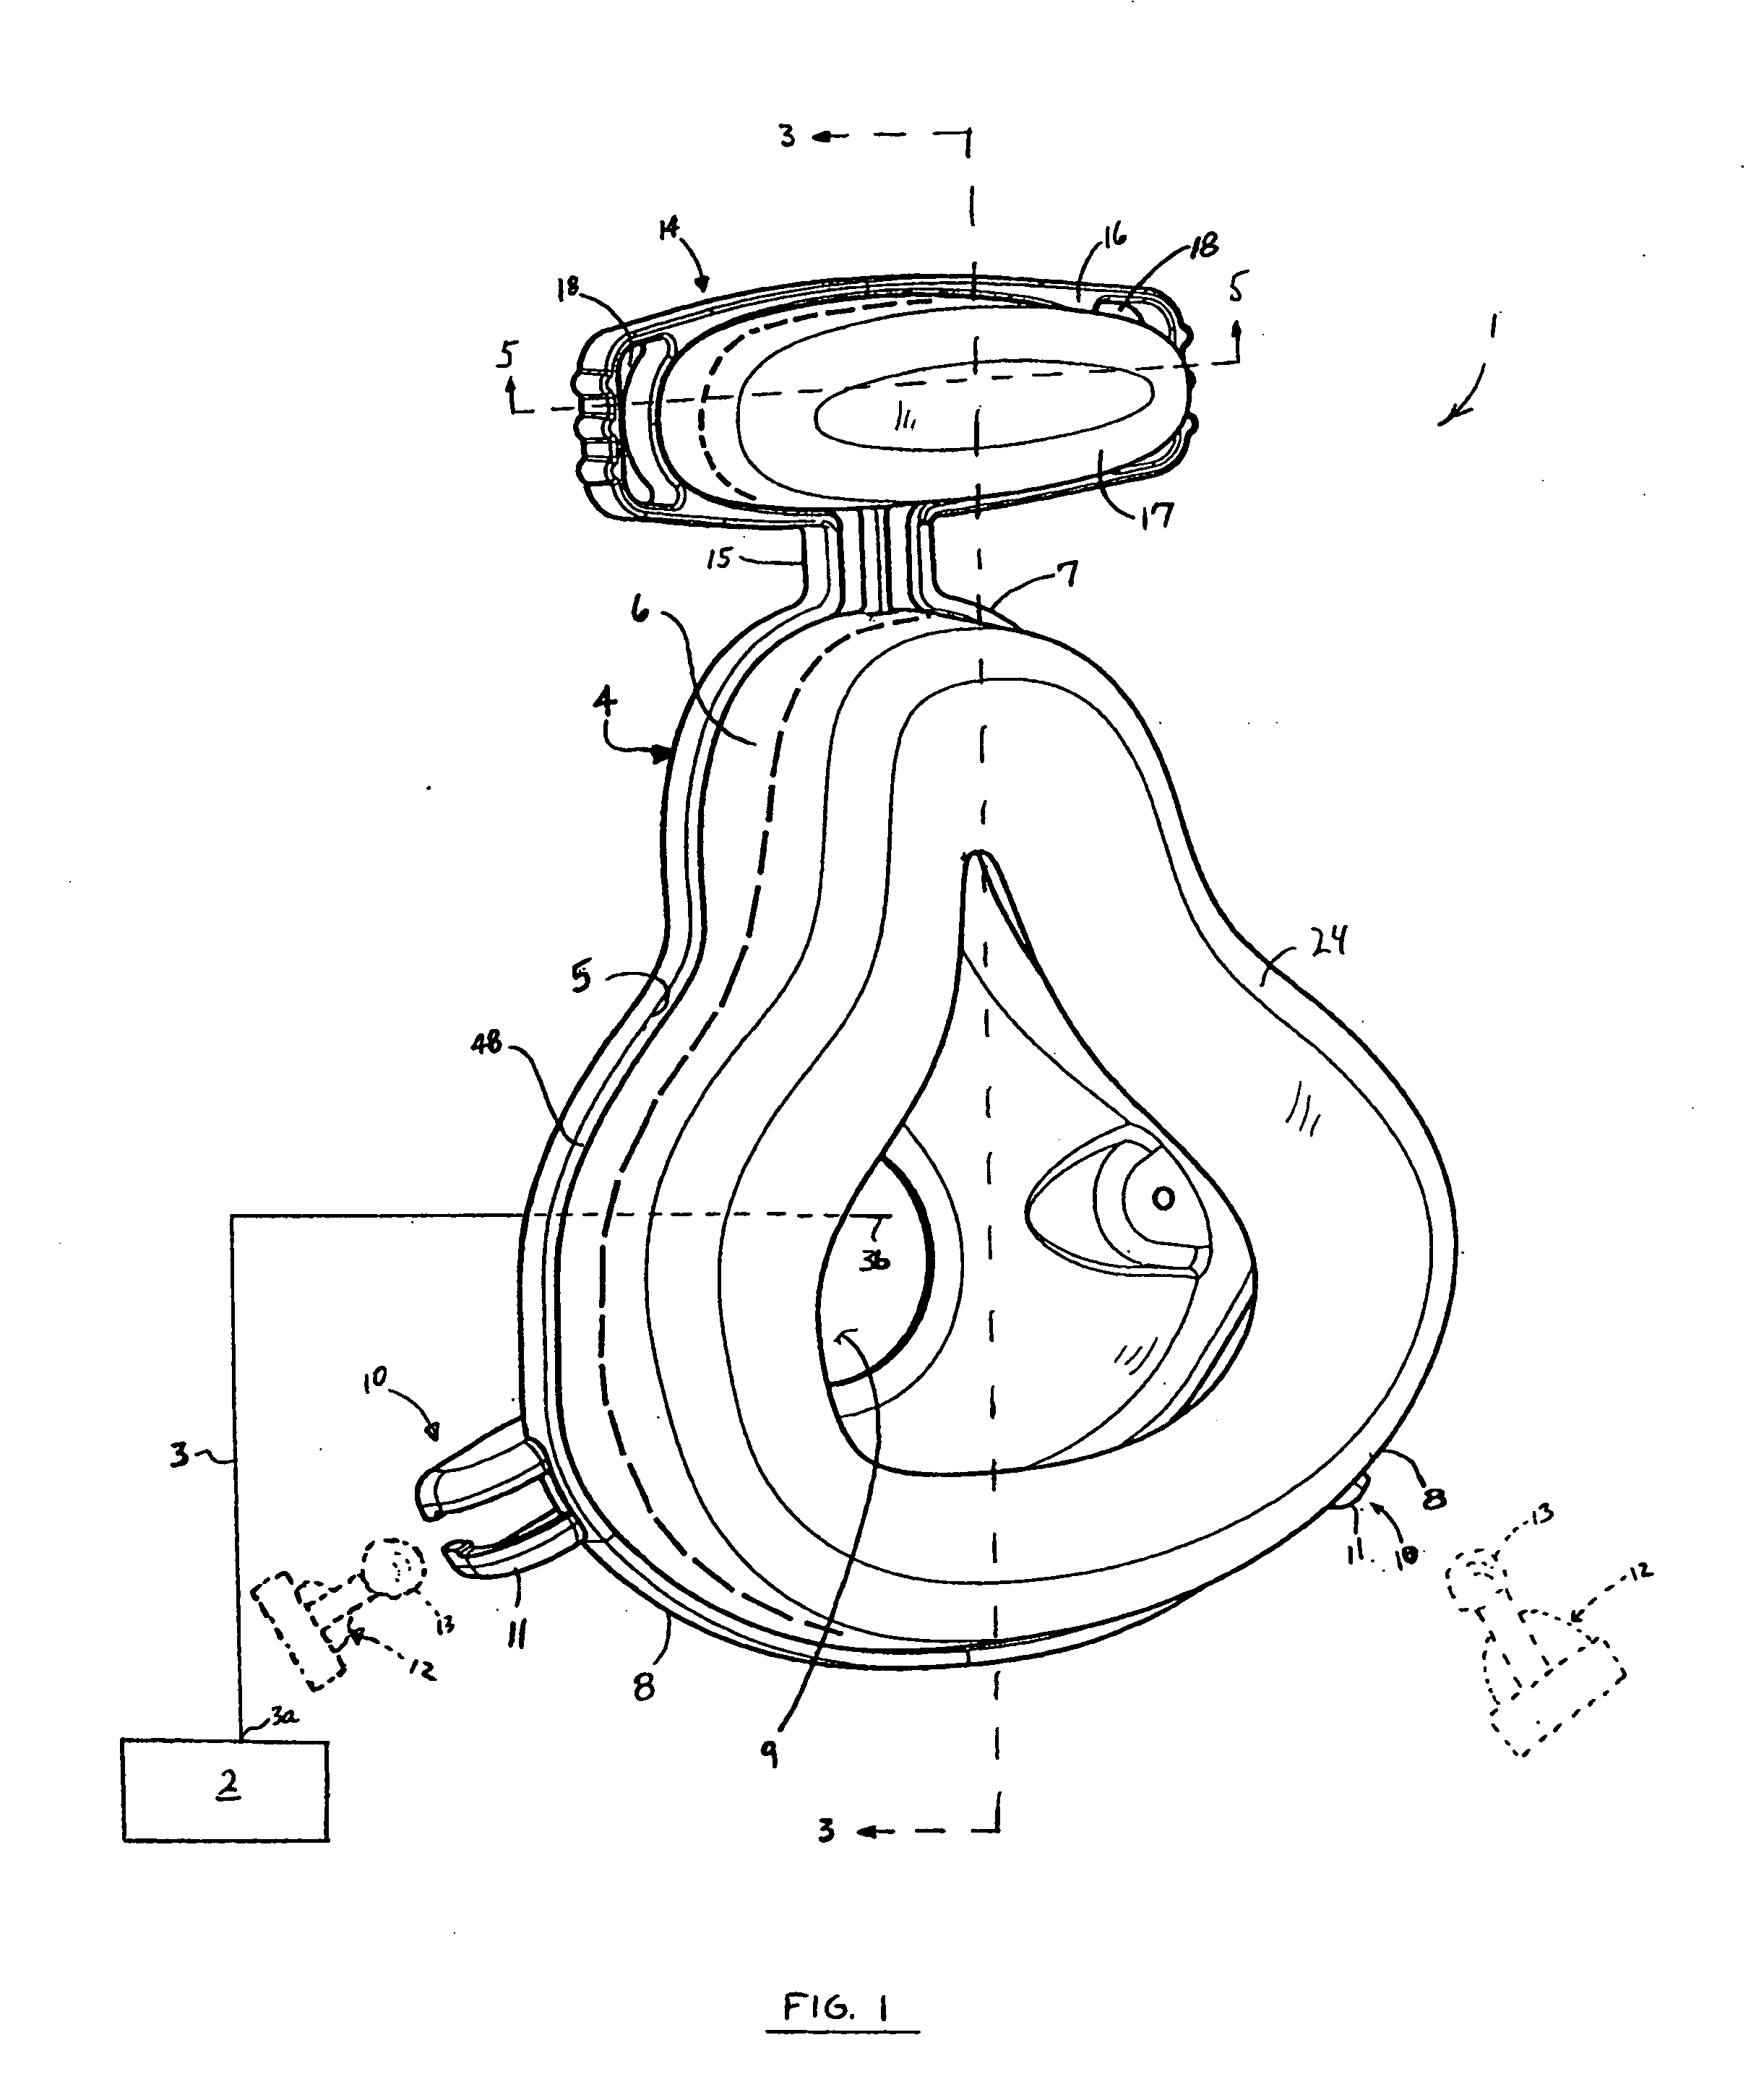 Patient interface device with dampening cushion